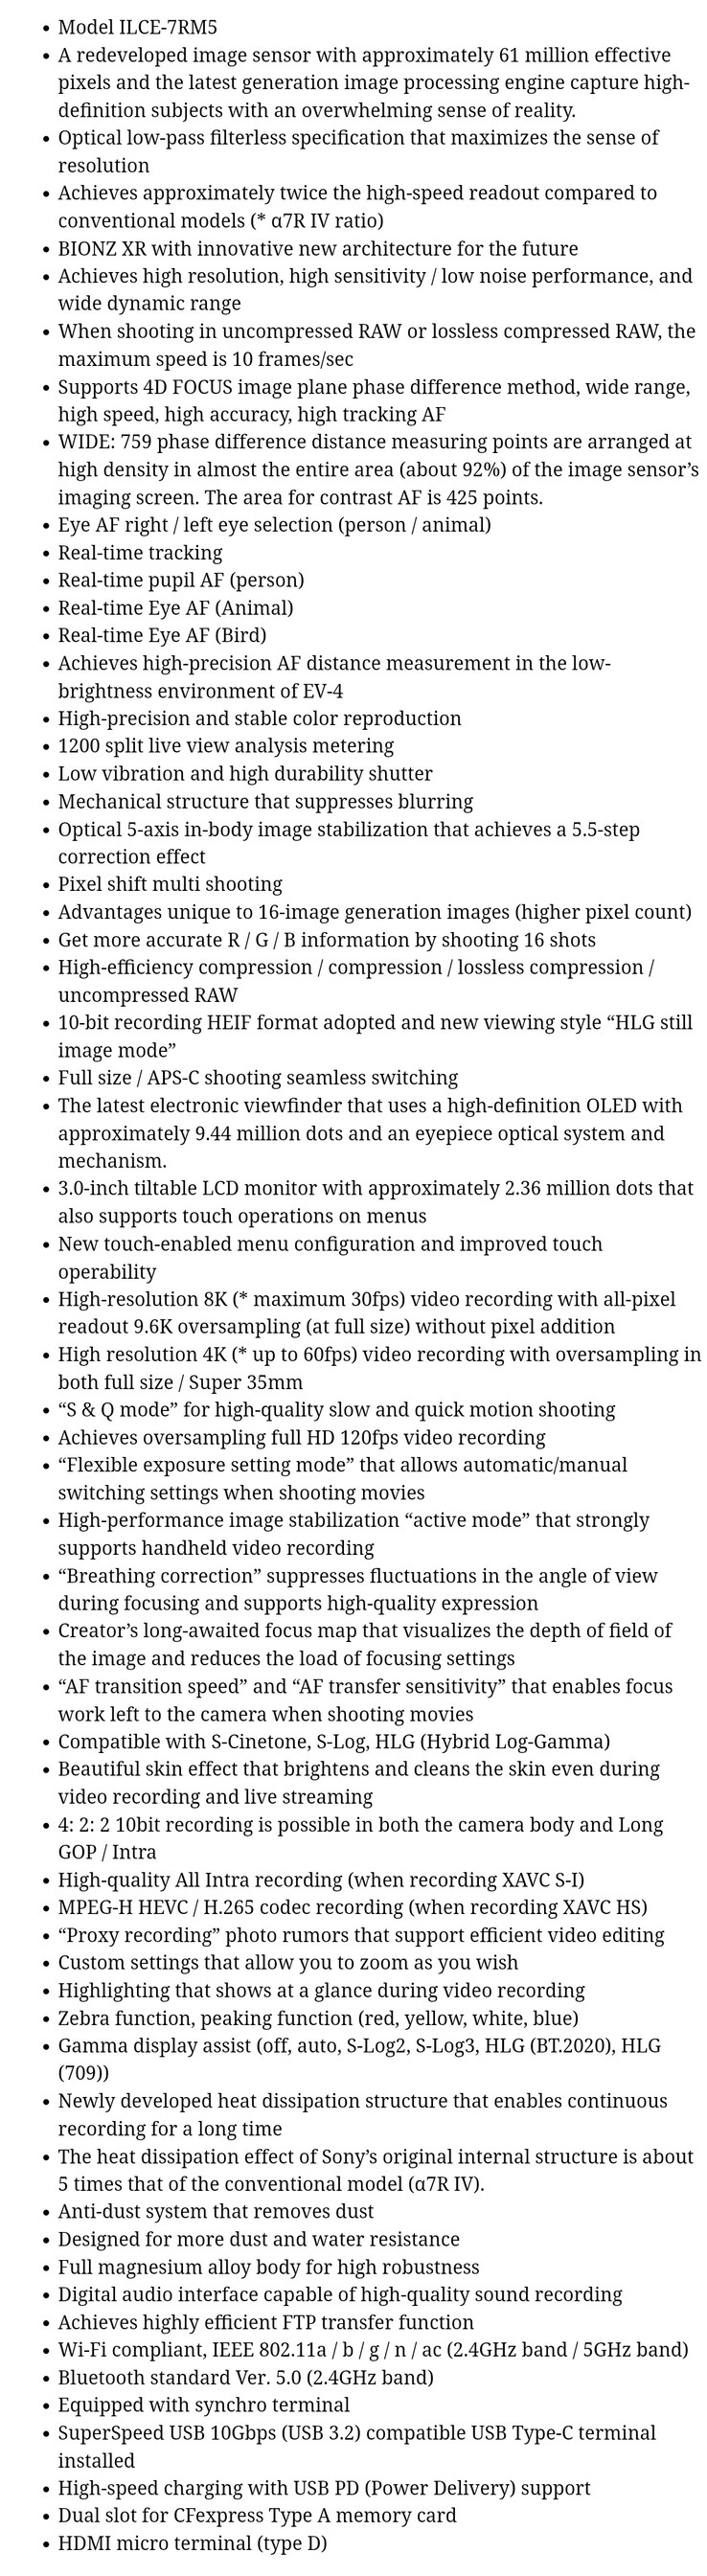 The Sony a7R V's alleged specs-list in full. (Source: PhotoRumors)